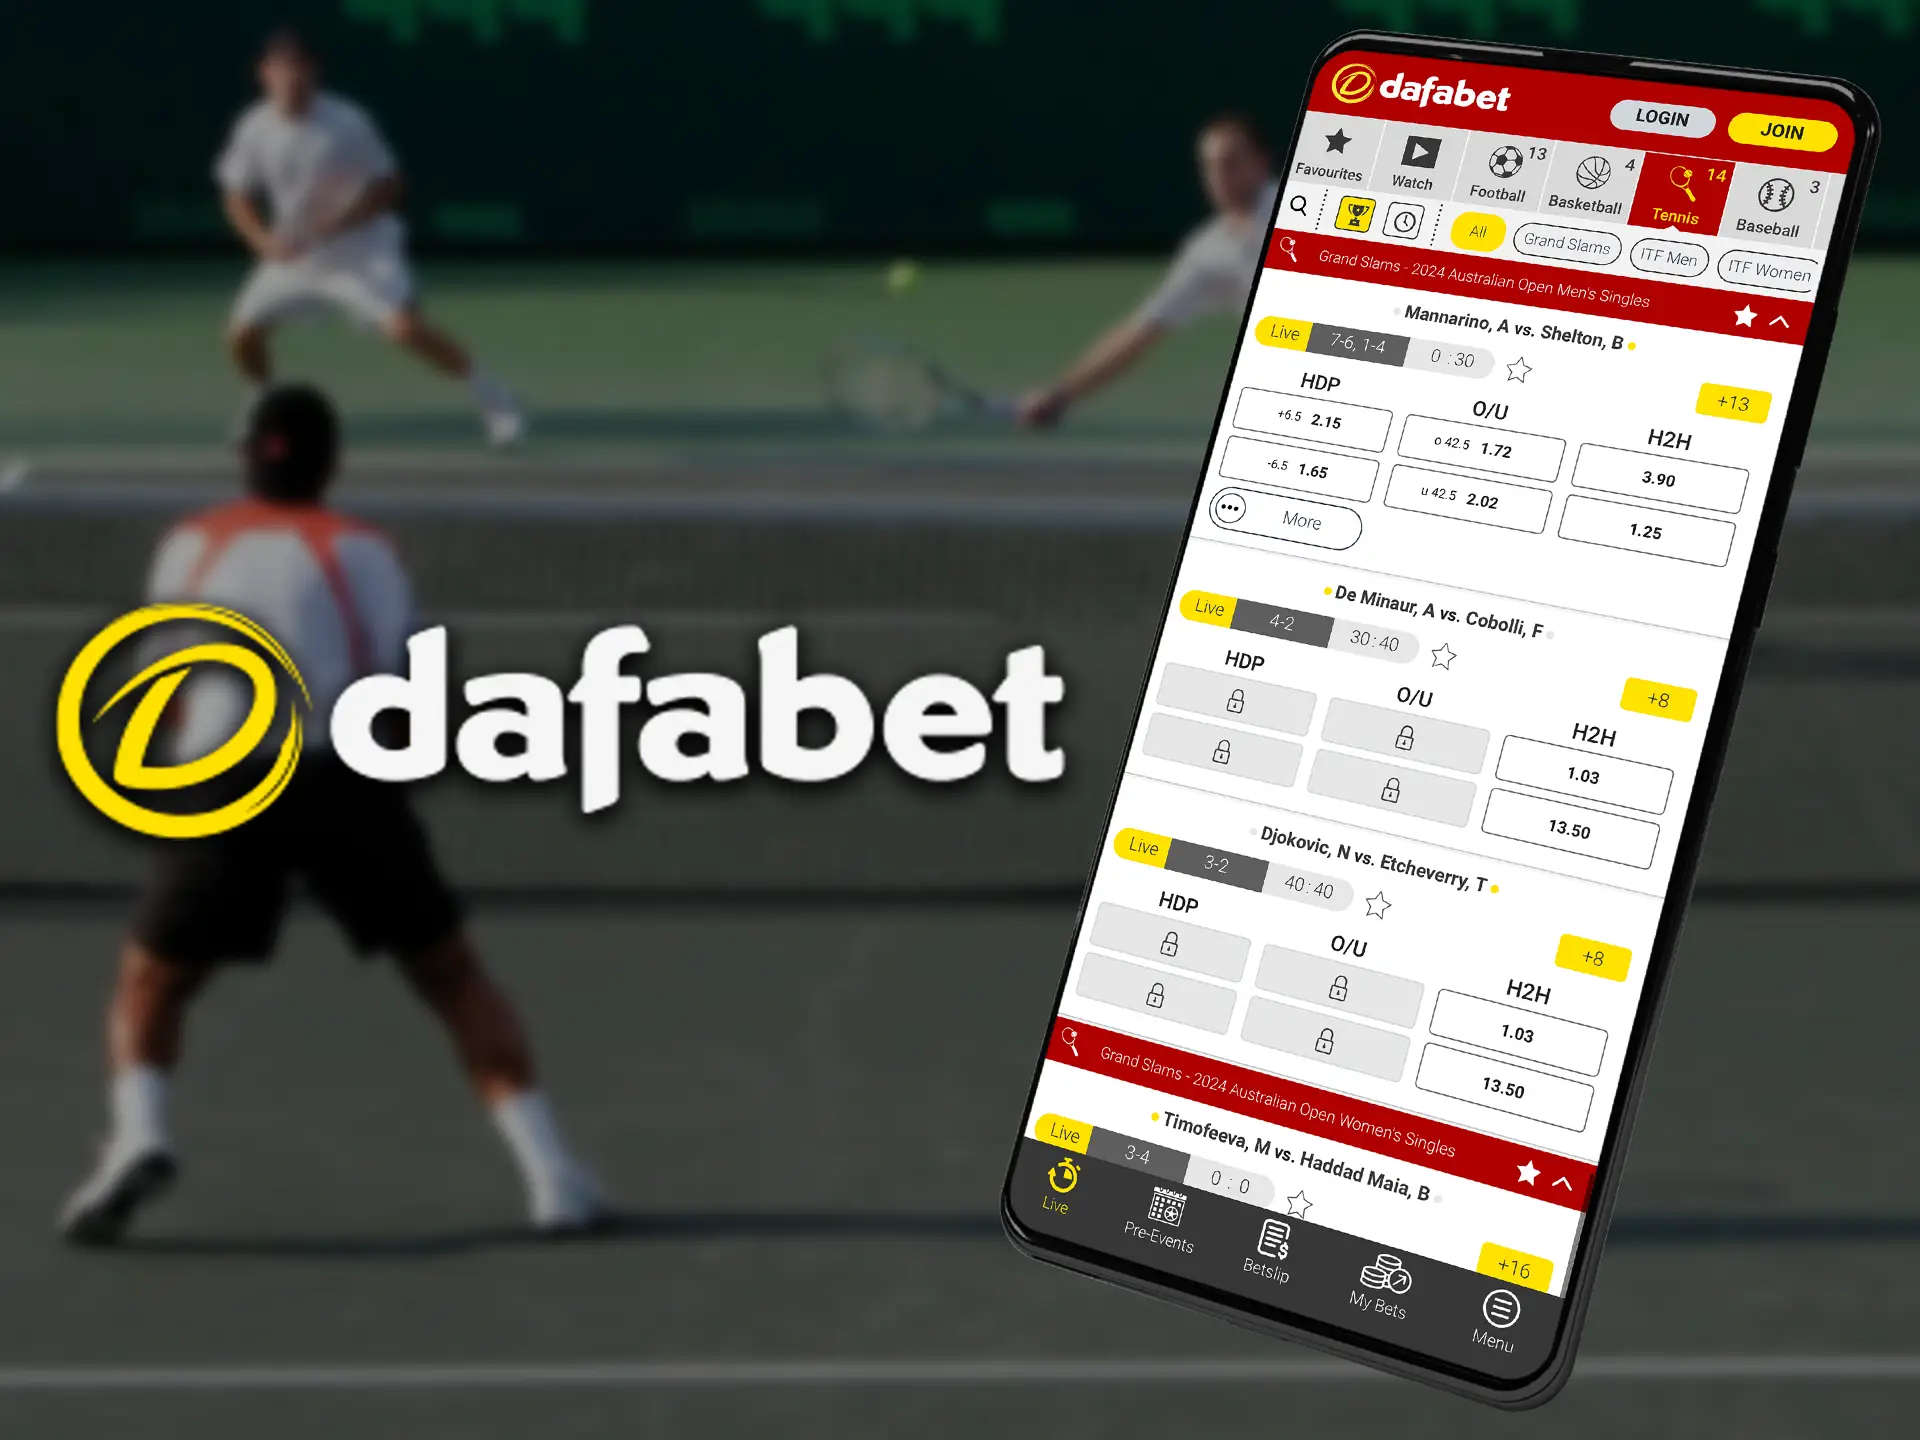 The Dafabet app is valued among Indian players for its high odds.